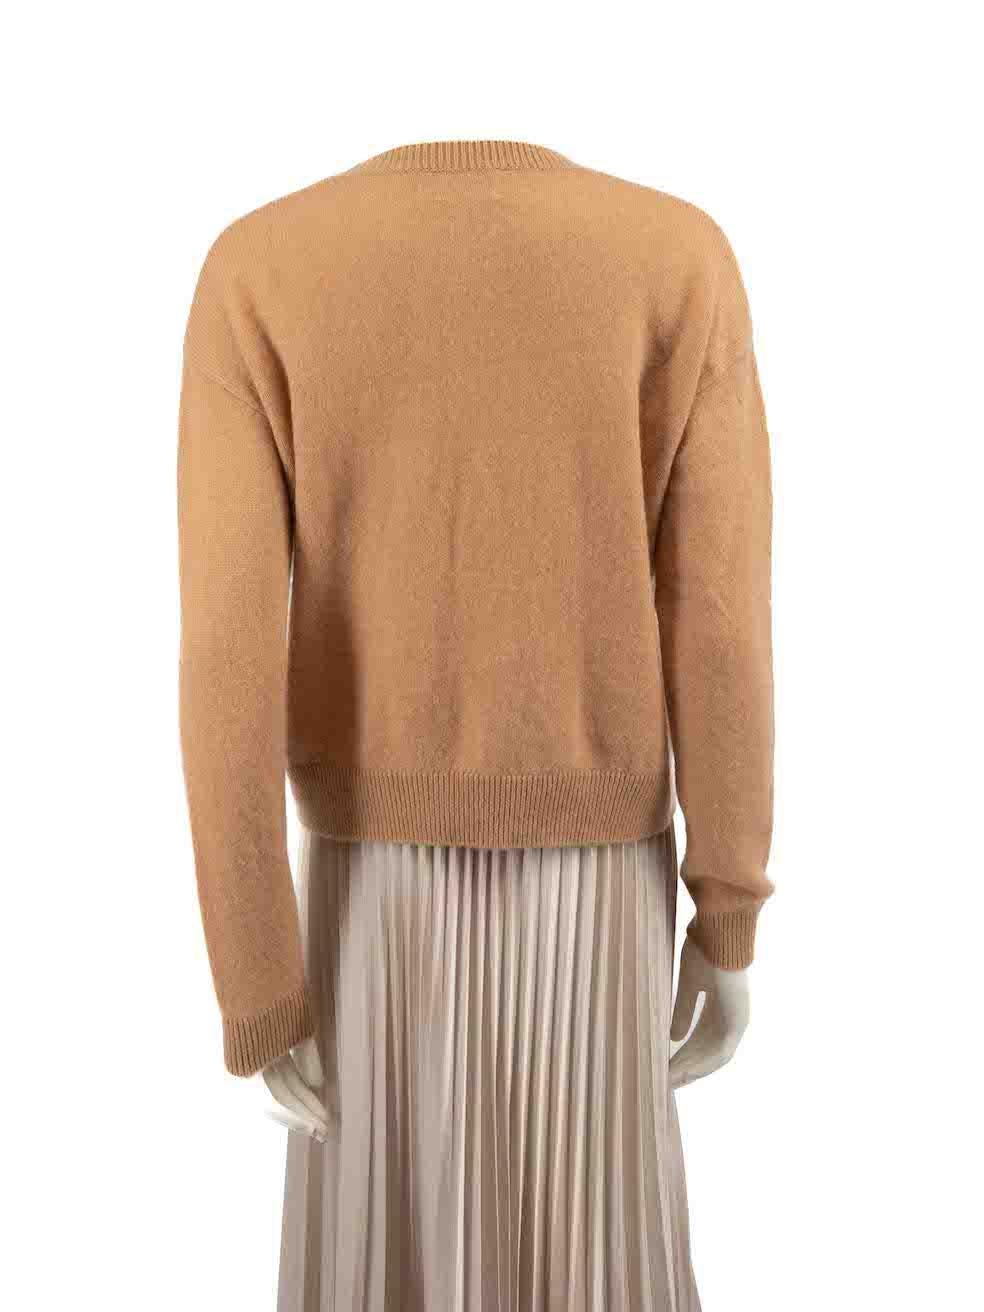 FROM FUTURE Brown Cashmere Knit Graphic Jumper Size S In New Condition For Sale In London, GB